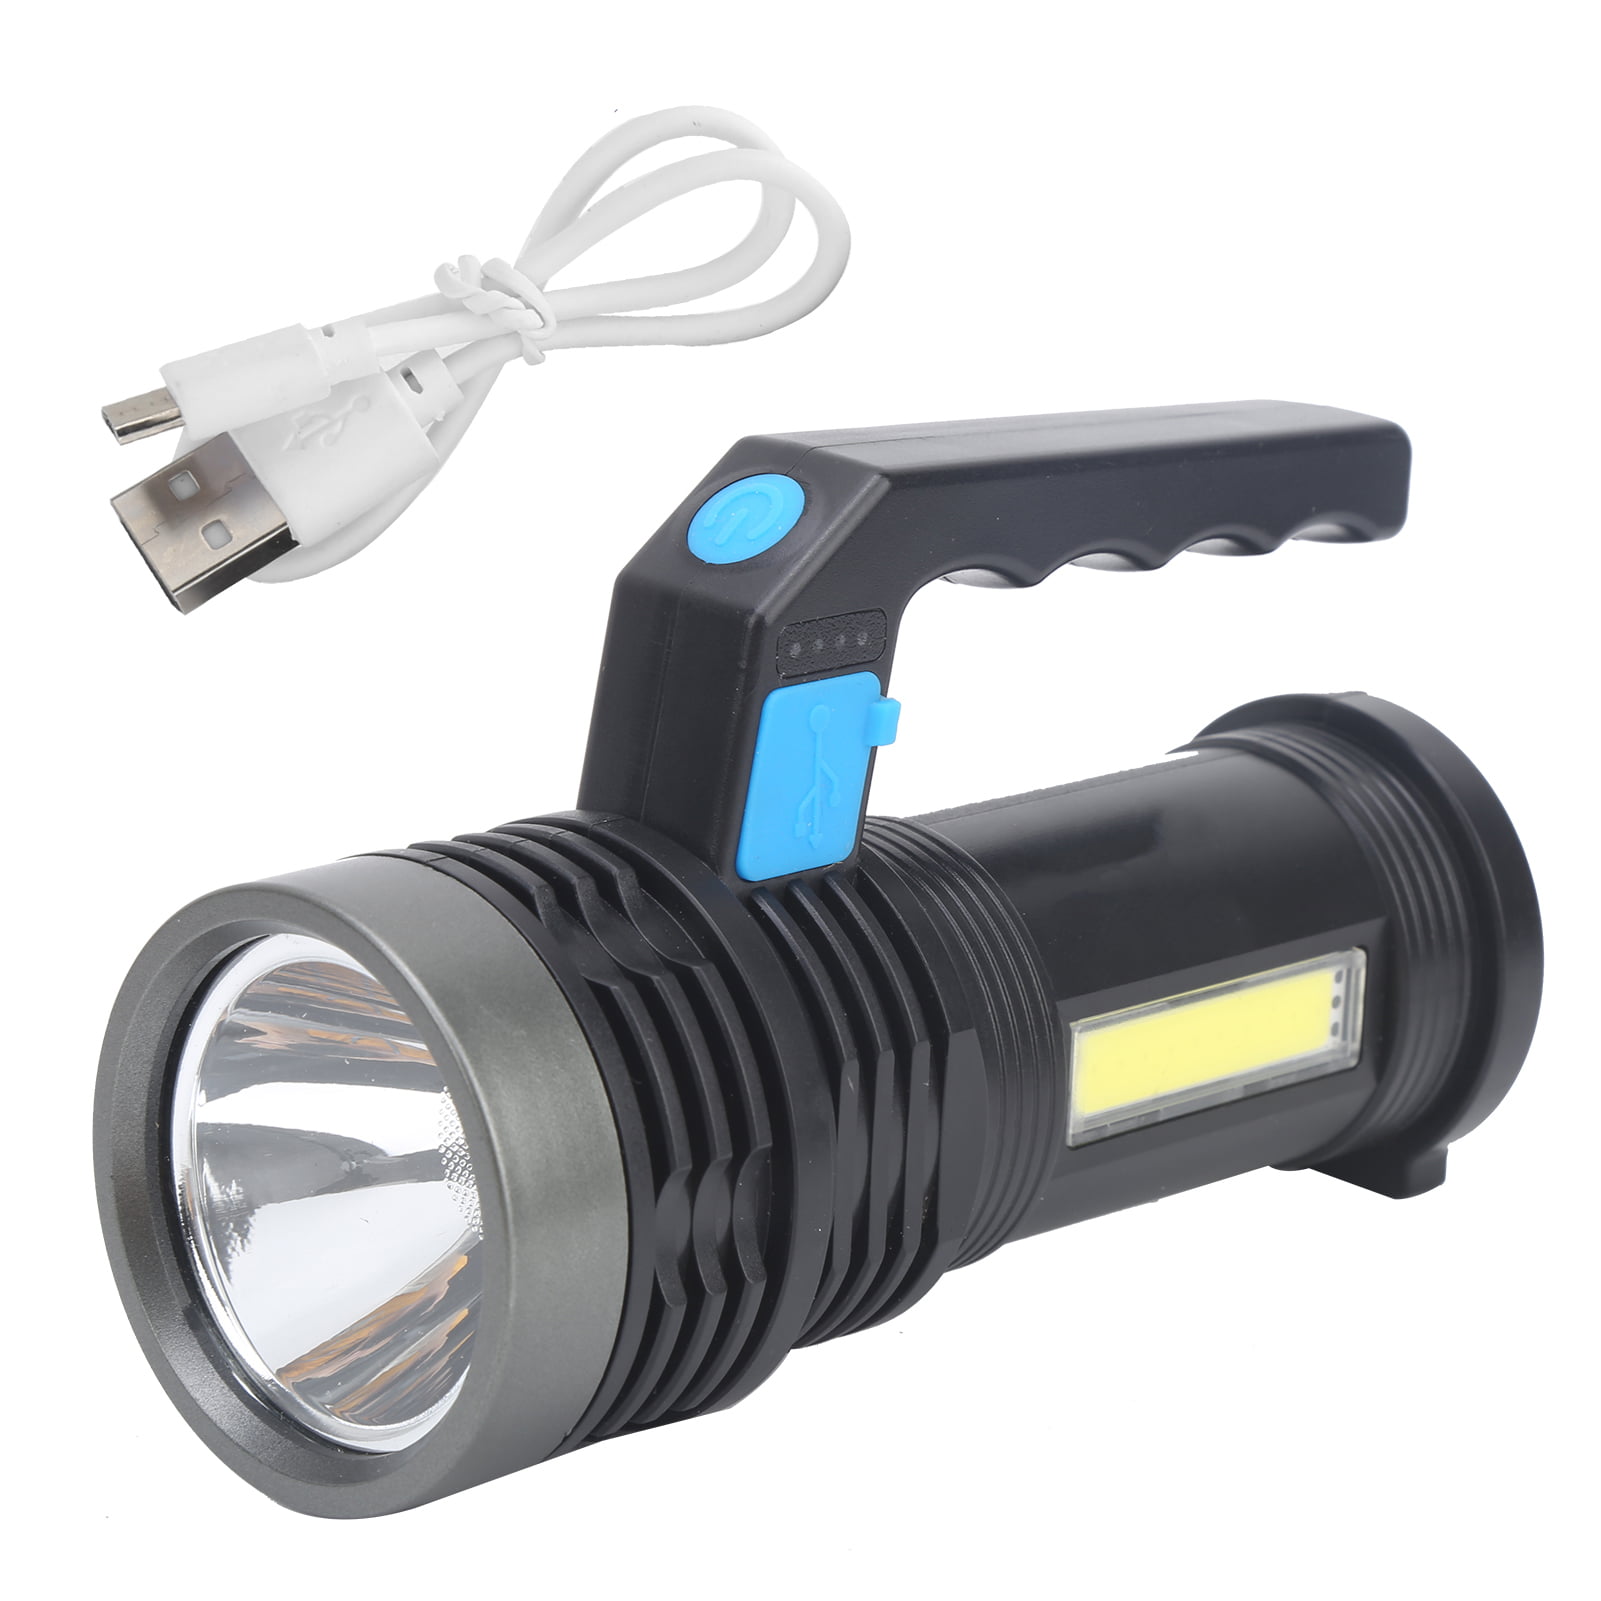 Large Rubberised Focus Beam LED Torch Home Workshop Camping Security Car 